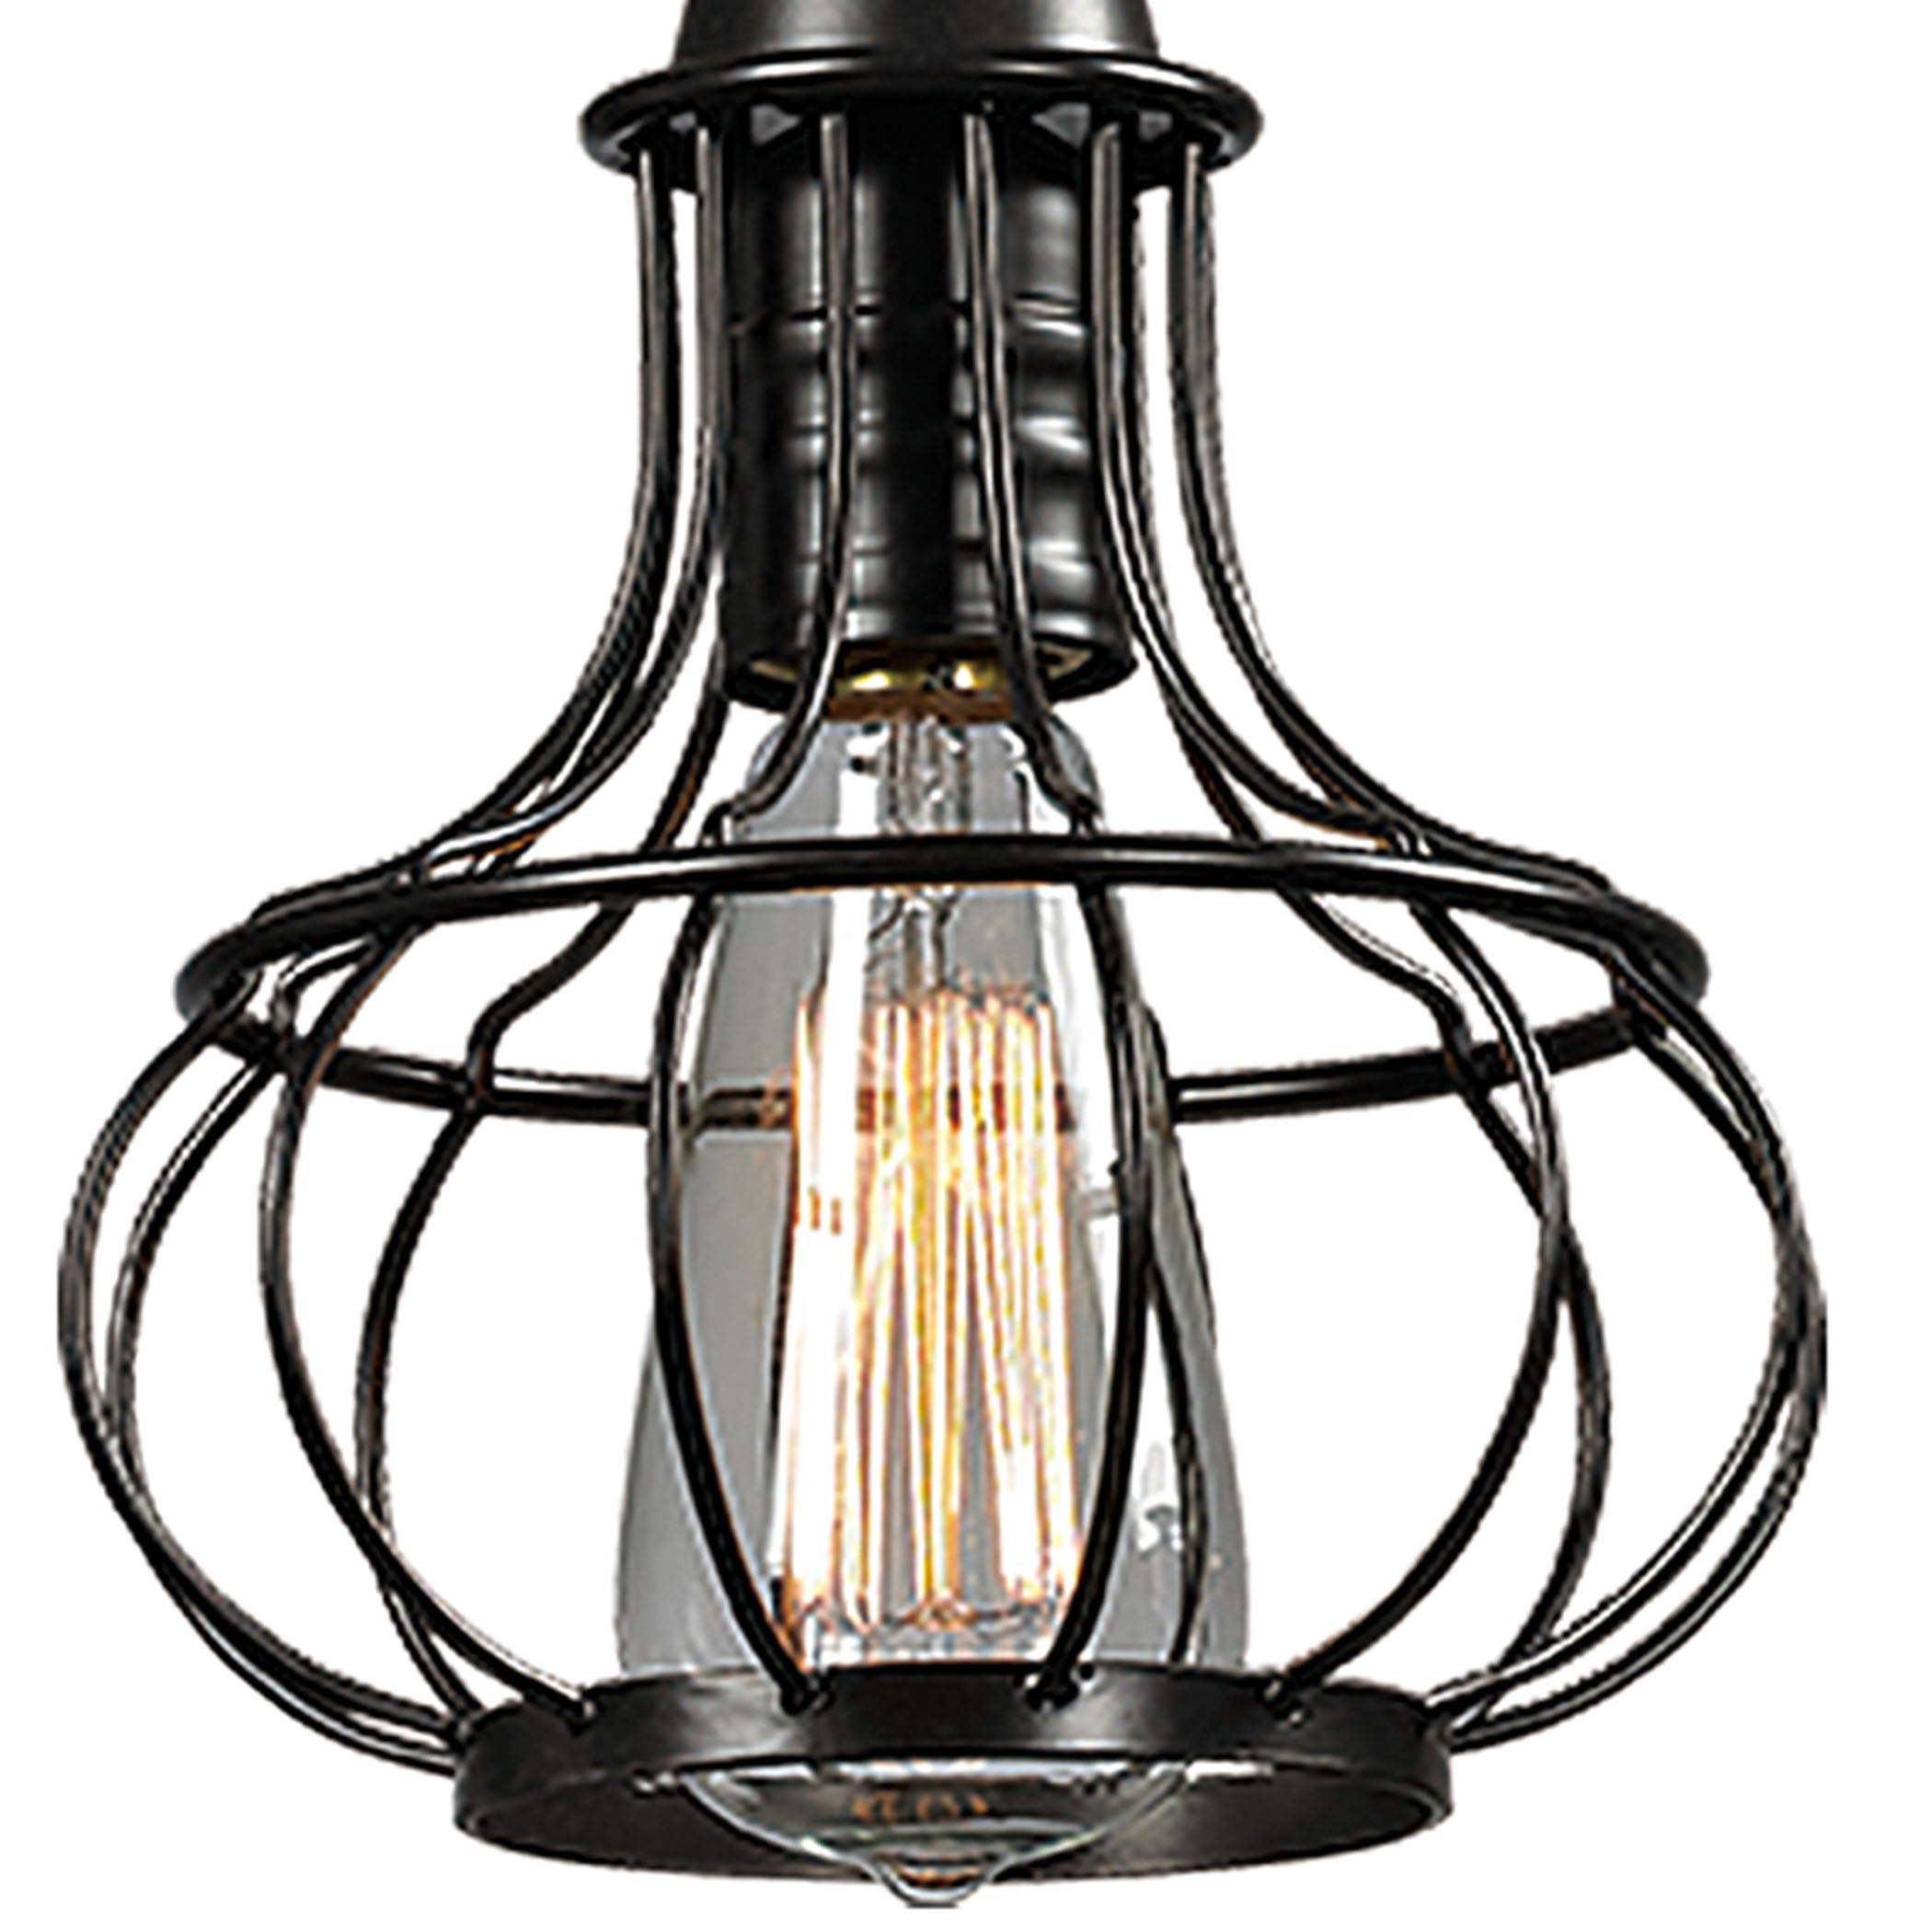 ELK Lighting 14191/1 Yardley 1-Light Mini Pendant in Oil Rubbed Bronze with Wire Cage